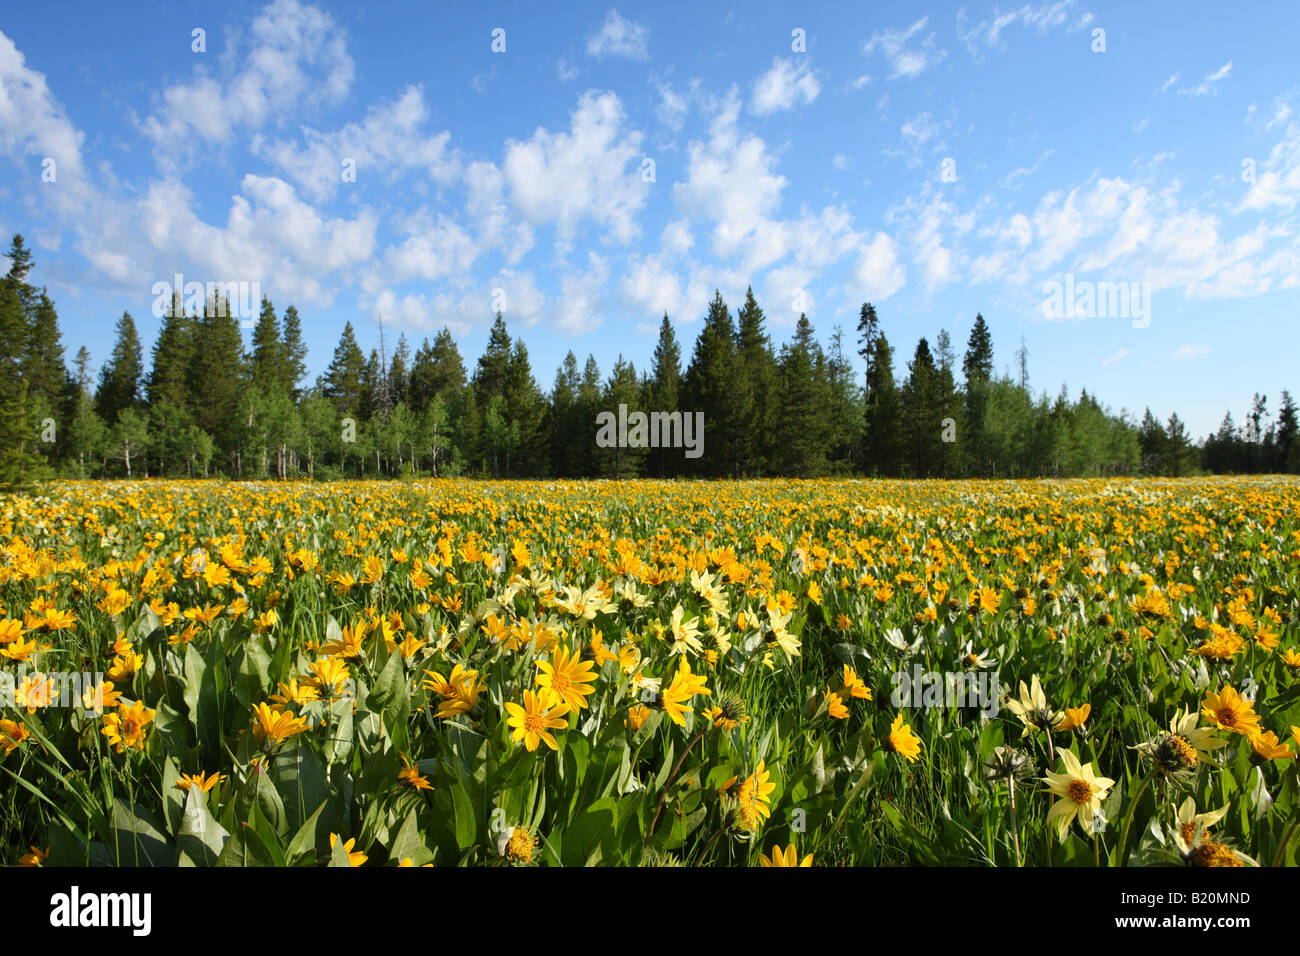 Field of colorful Arrowleaf balsamroot wildflowers in the Targhee National Forest Idaho Stock Photo